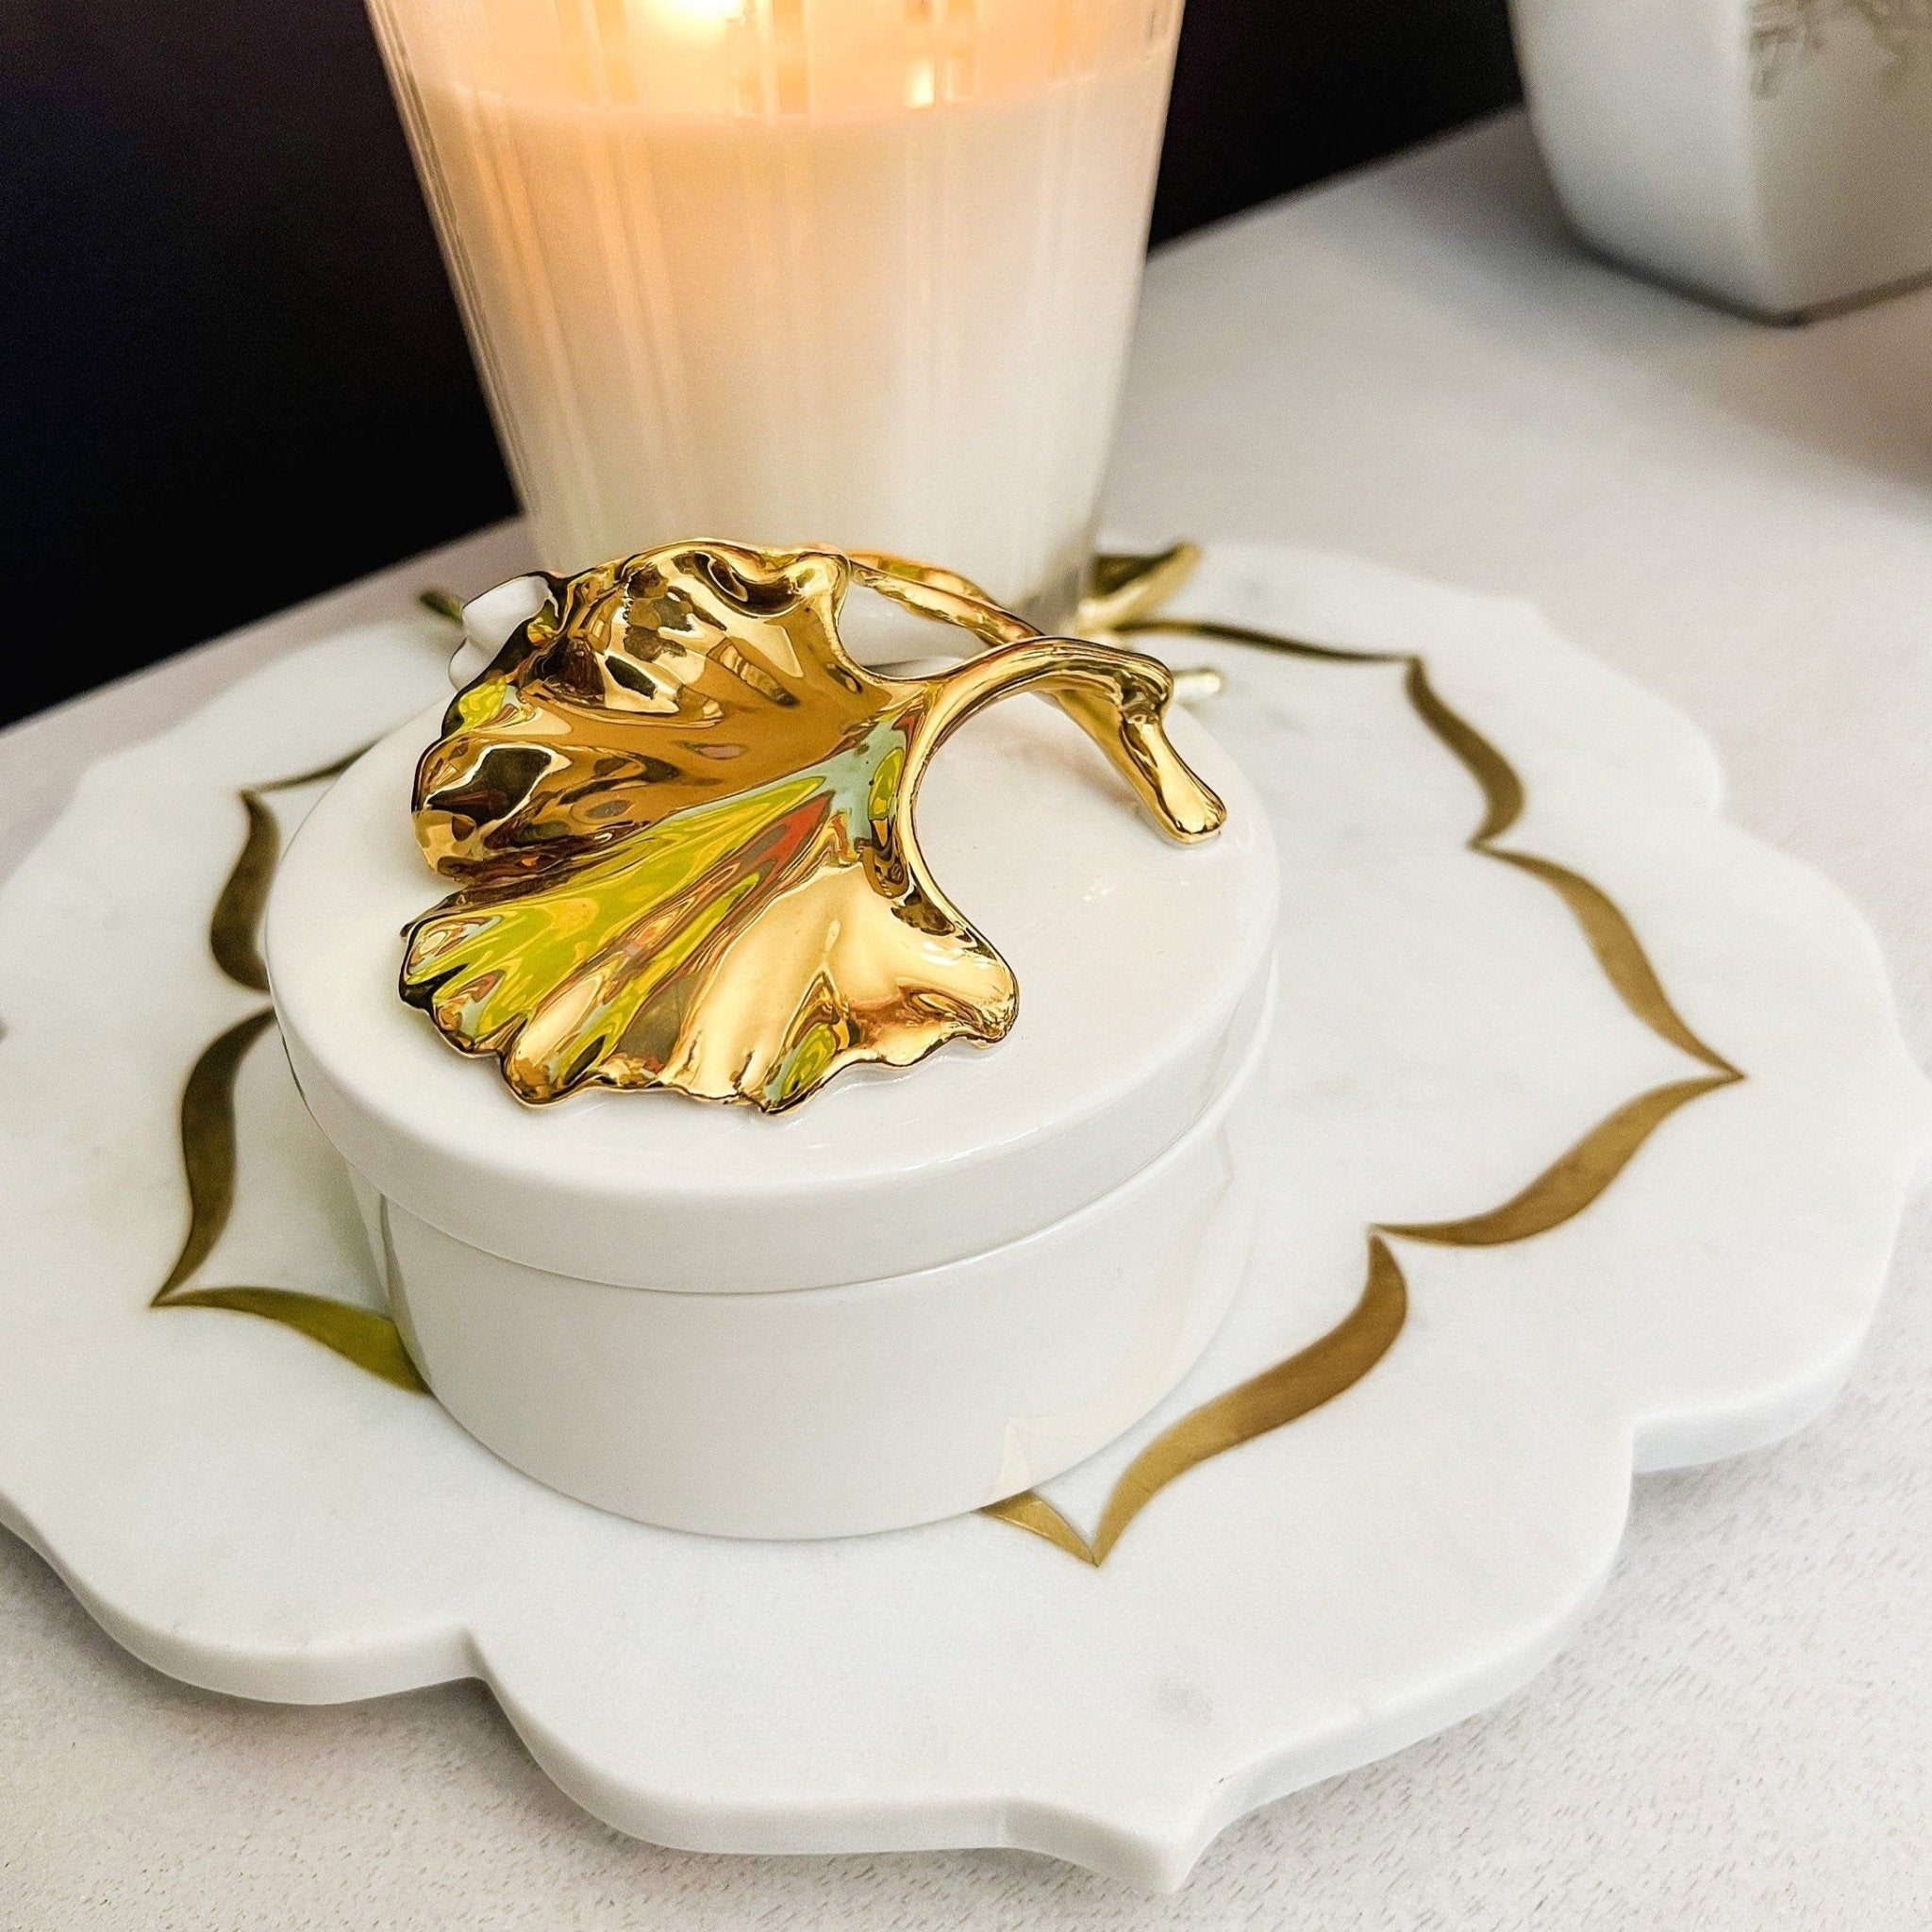 White Marble with Gold Inlay Pedestal Stand (12") | Decorative Tray | Marble Serving Tray | Large Tray | Pedestal Tray | Housewarming Gift - DiamondValeDecor